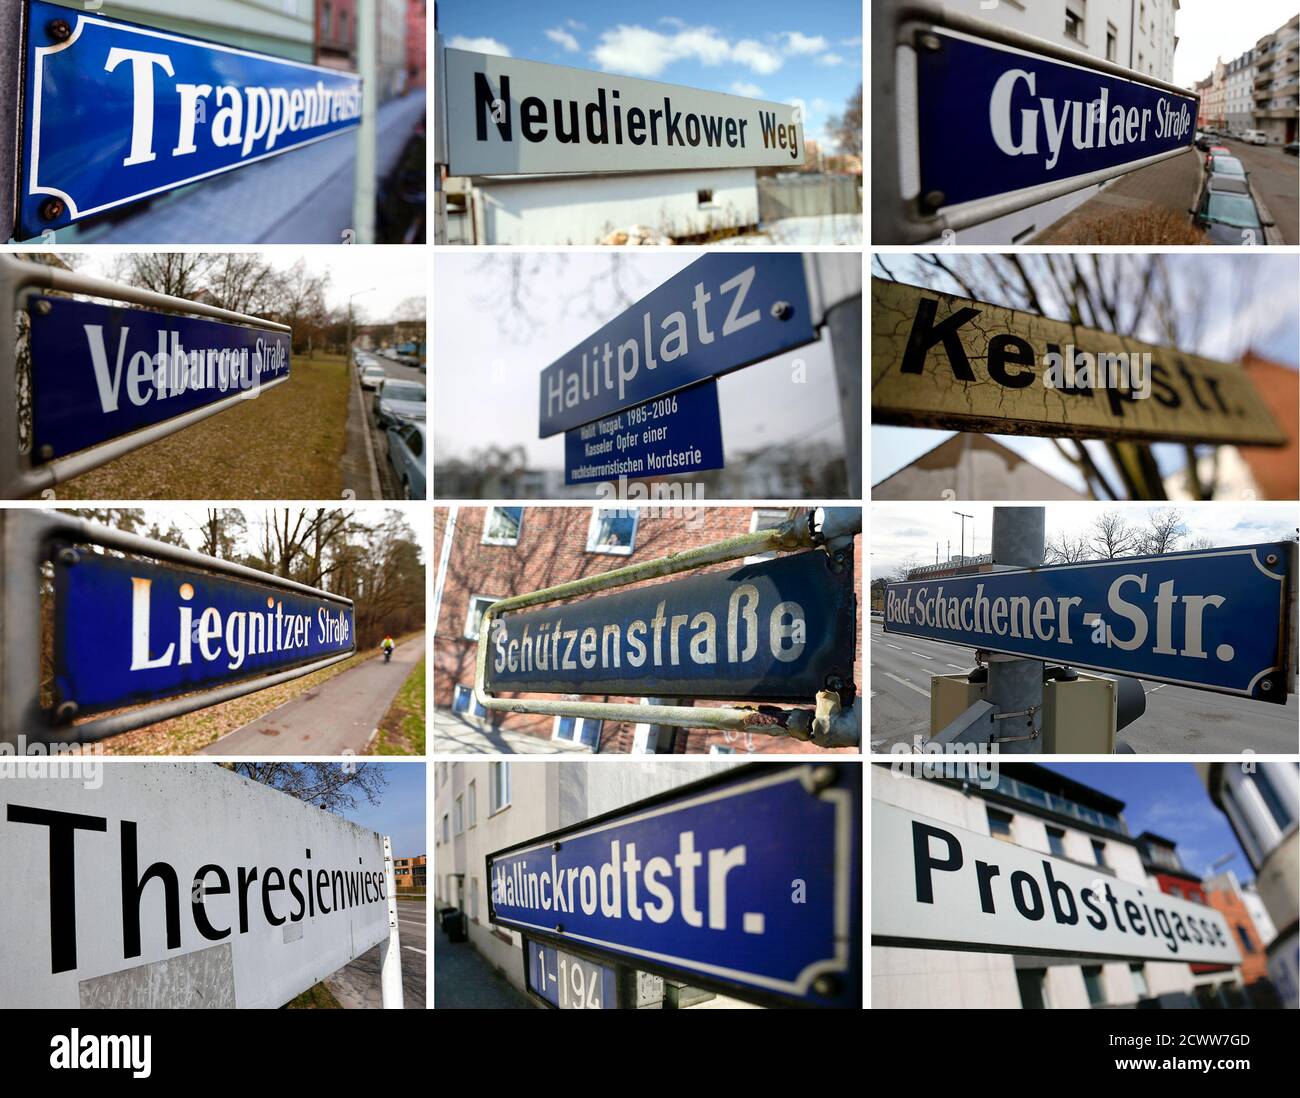 A combination picture shows street signs in the cities of Dortmund, Nuernberg, Hamburg, Munich, Rostock, Kassel and Heilbronn where the neo-Nazi group National Socialist Underground (NSU) carried out their attacks, and a sign marking a square named after victim Halit Yozgat (2nd row from top C). An alleged member of the NSU, 38-year-old Beate Zschaepe, will go on trial in Munich in April 17, 2013, charged with the murders. The NSU is accused of murdering nine Turkish and Greek immigrants and a policewoman from 2000 to 2007. Two other NSU members committed suicide in late 2011 after a botched b Stock Photo